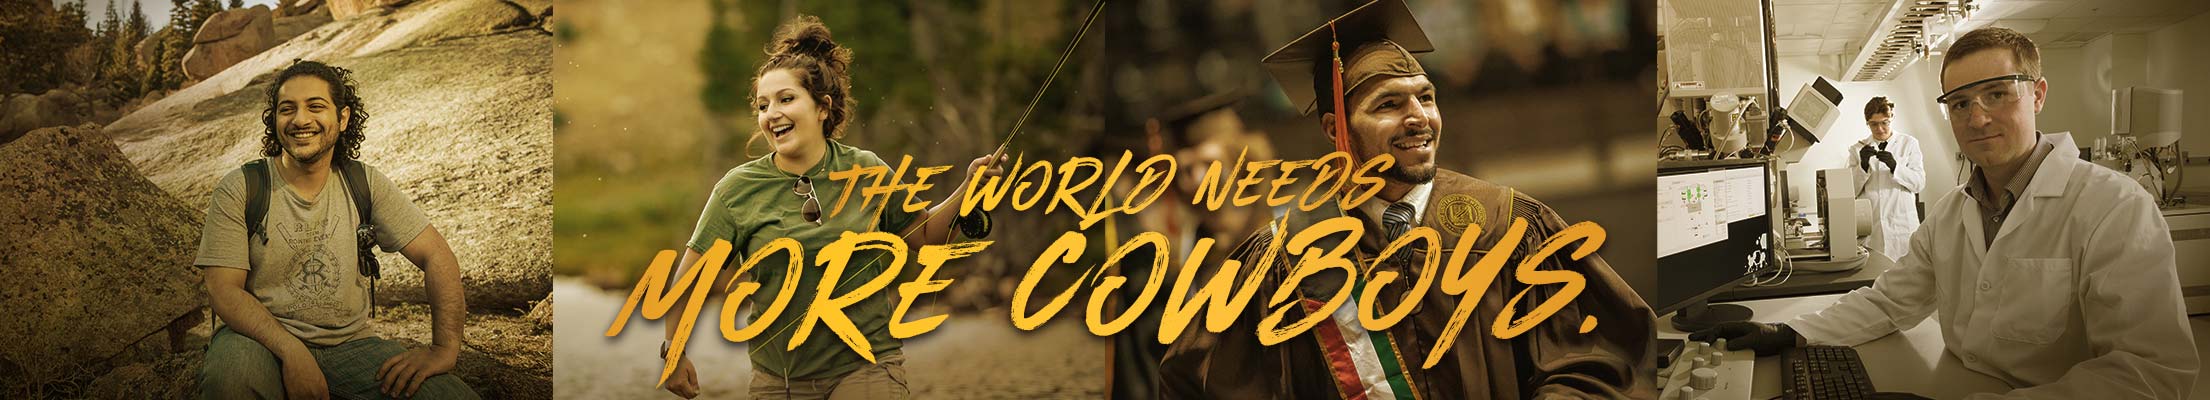 A collage of UW imagery with the words "The World Needs More Cowboys" over top